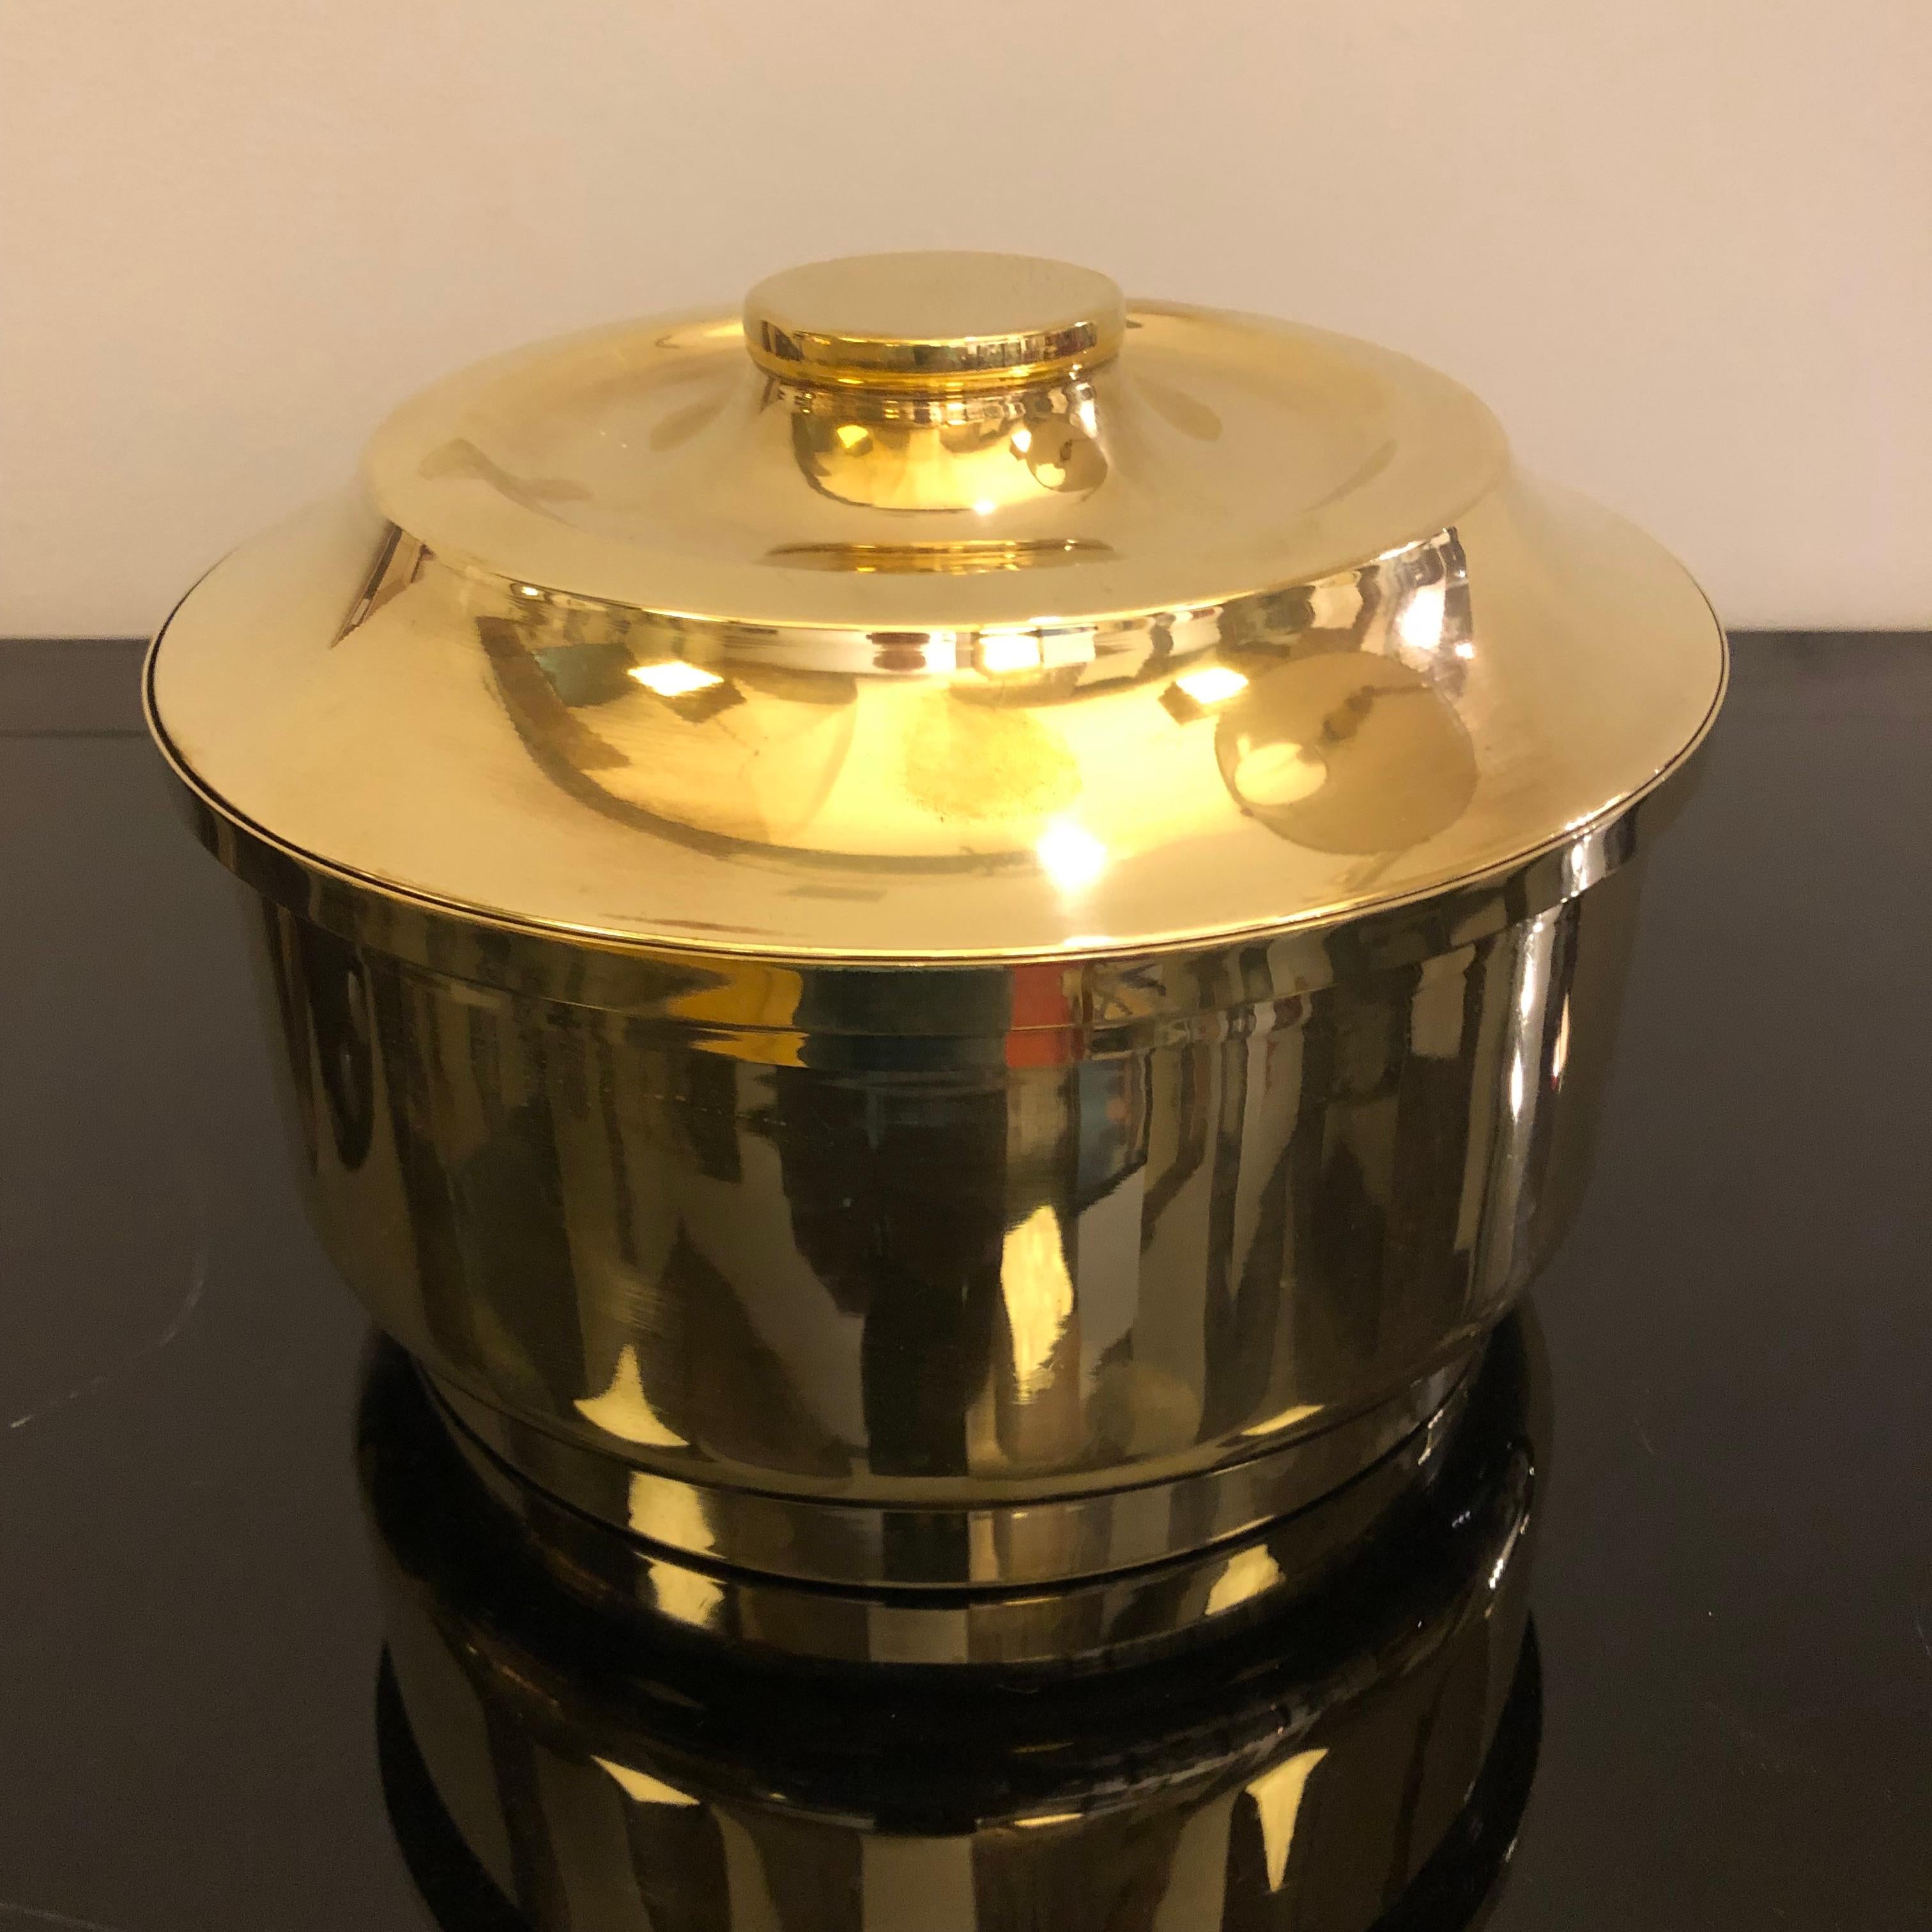 Round brass ice bucket made in Italy in the 1970s, item has been polished, inside the brass there is a glass useful to clean it. Item it's in very good conditions.